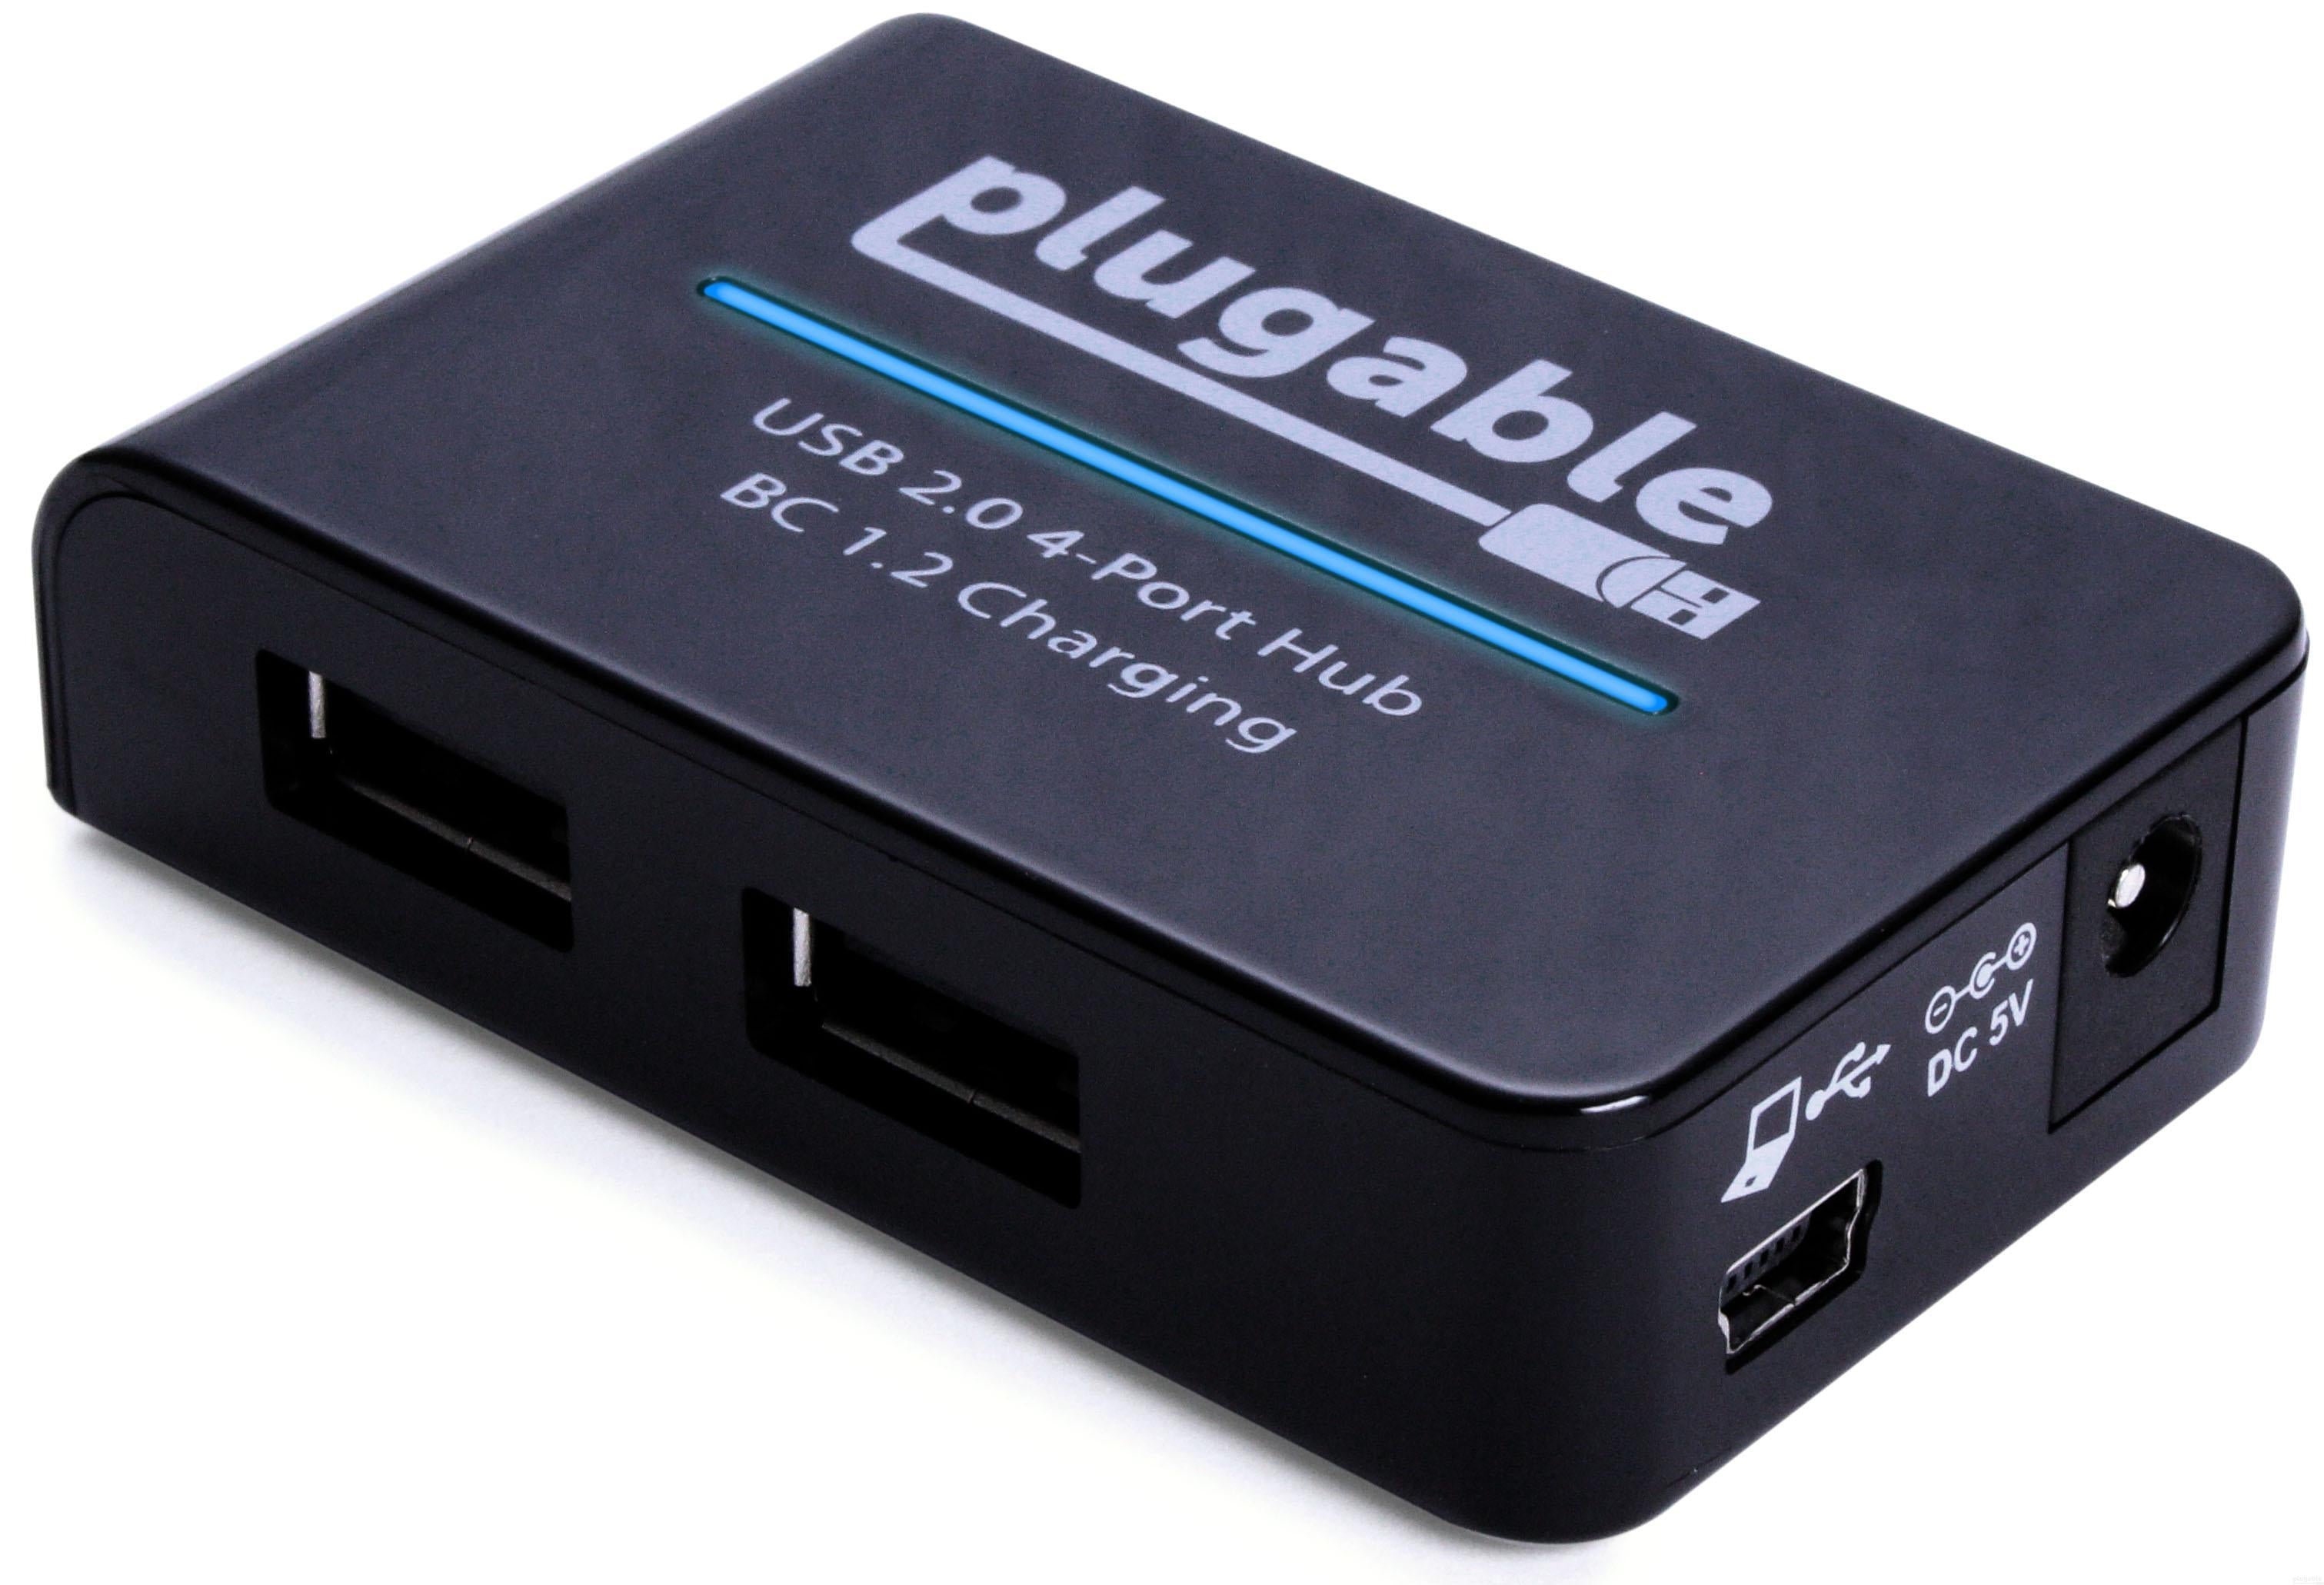 Plante træer at opfinde Hest Plugable USB 2.0 4-Port Hub with 12.5W Power Adapter with BC 1.2 Charg –  Plugable Technologies